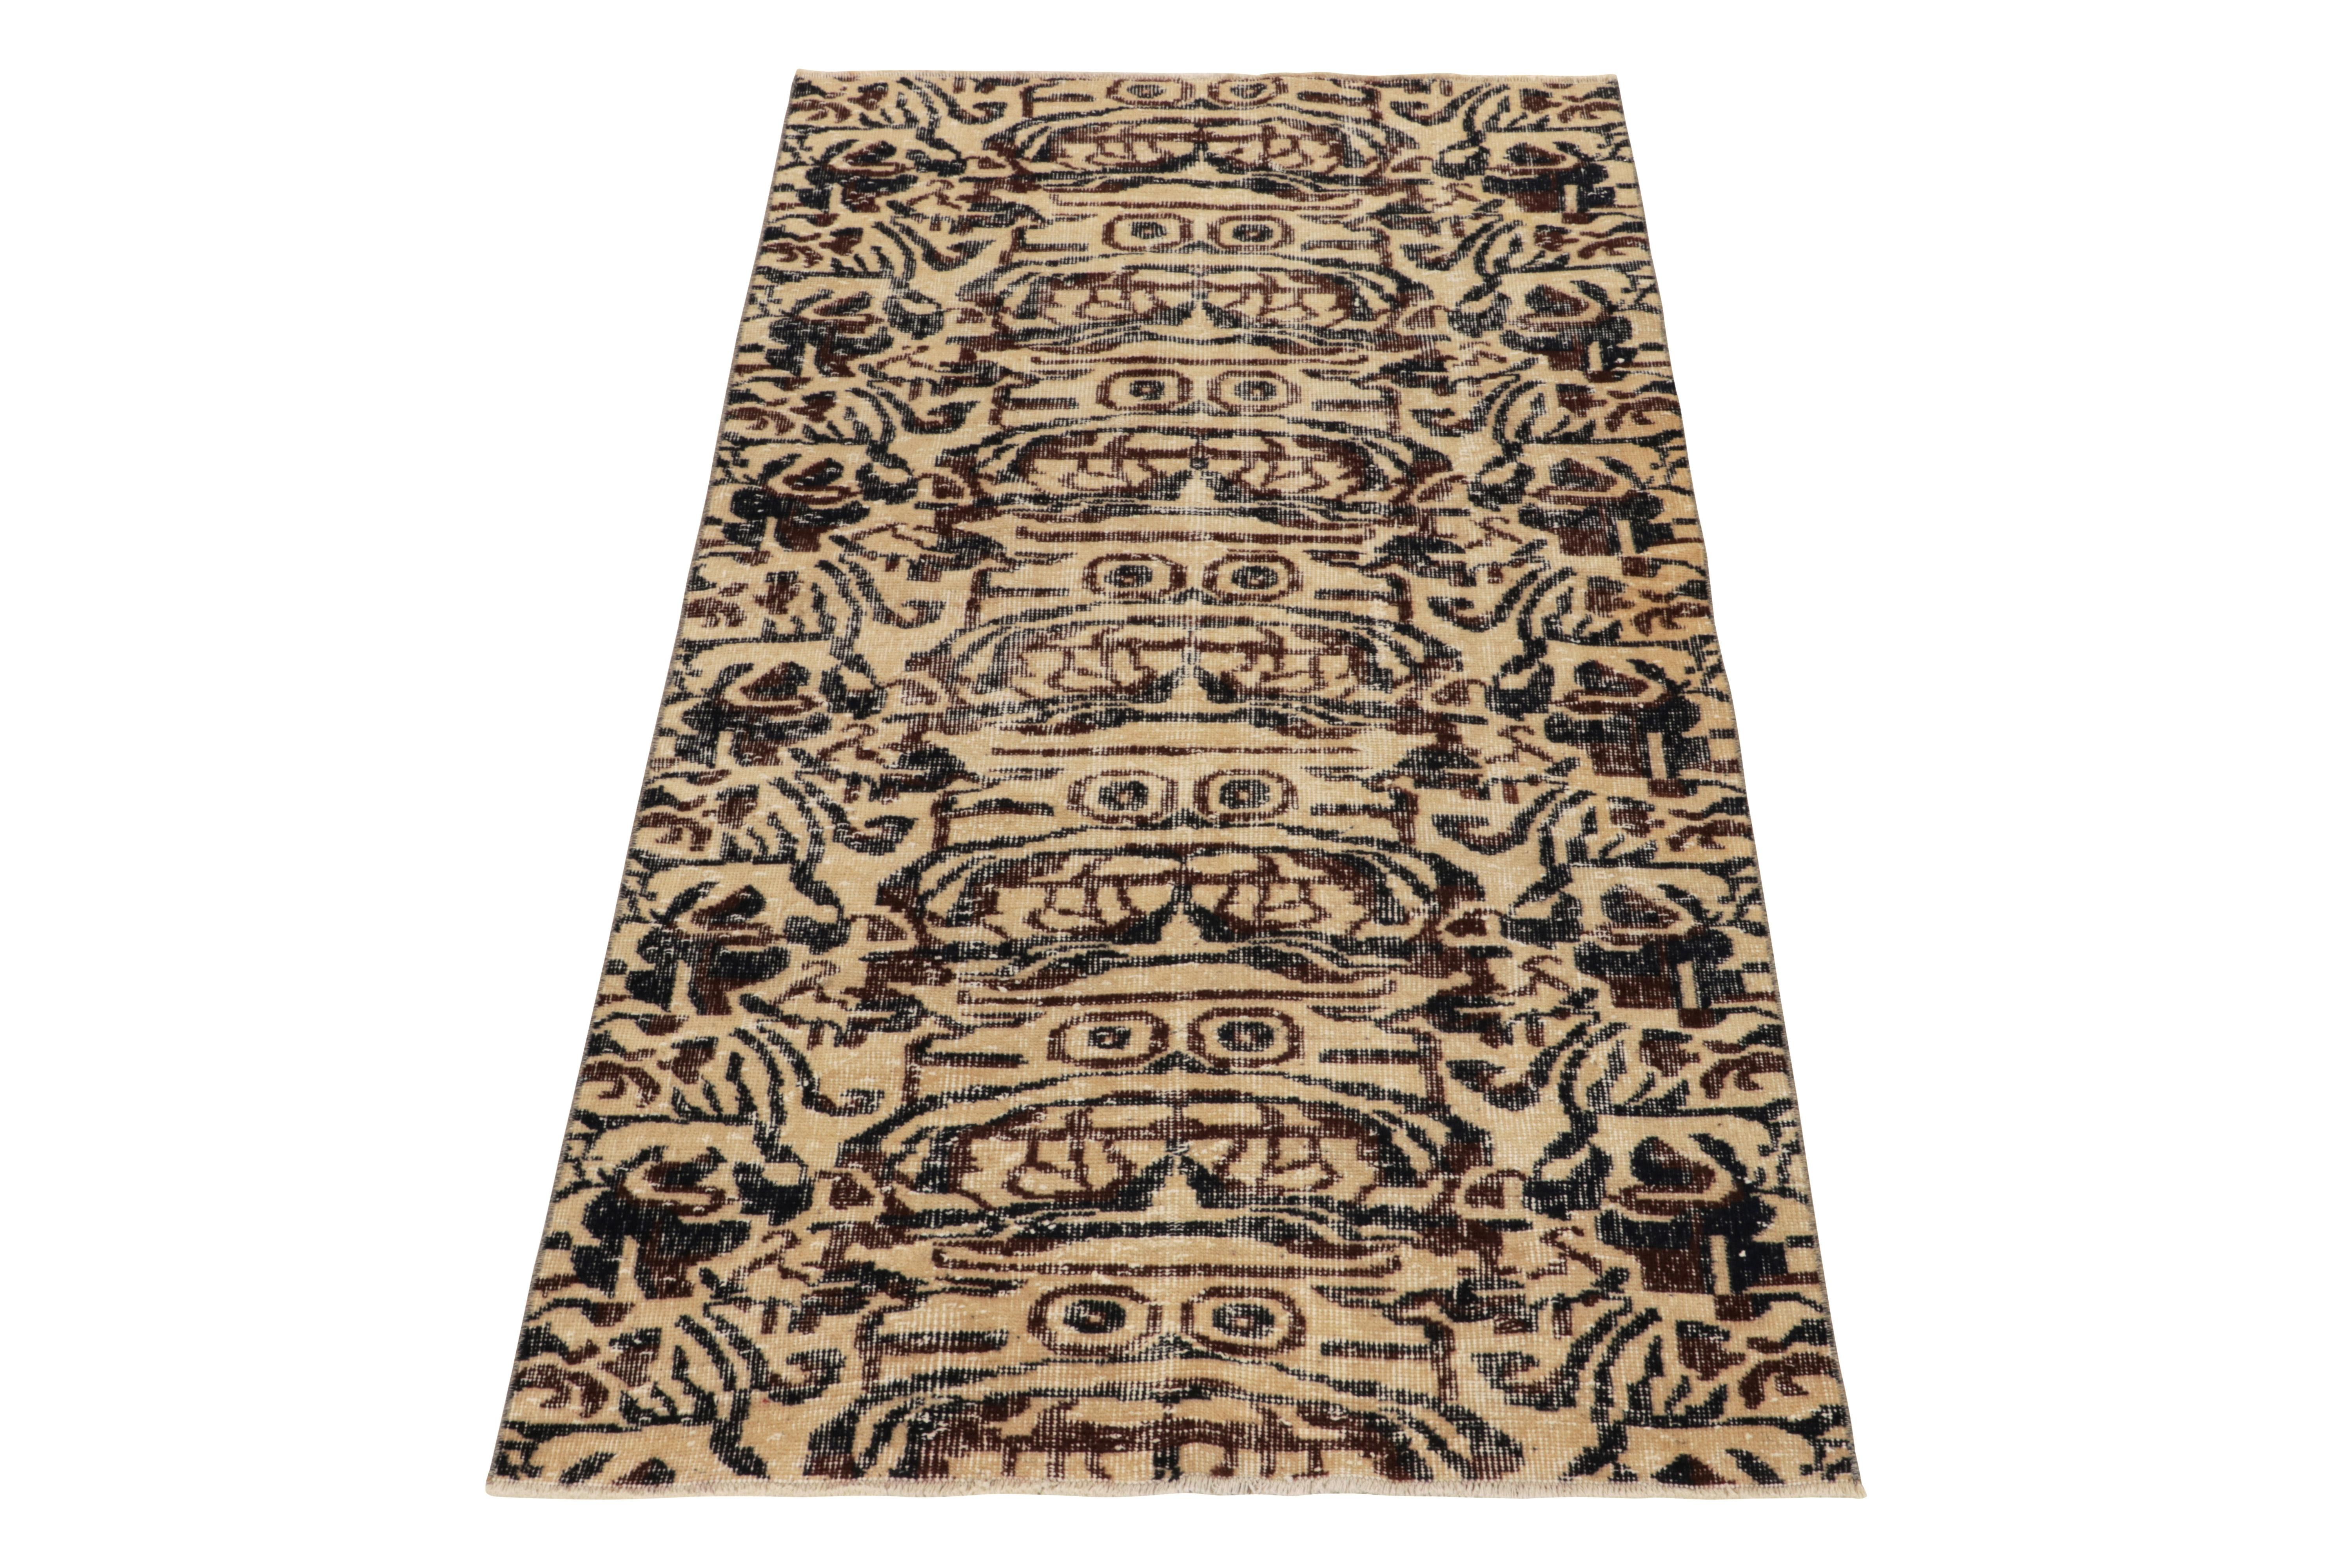 Hand-knotted in wool from Turkey circa 1960-1970, a vintage 3x6 distressed runner from an acclaimed Turkish artist joining Rug & Kilim’s Mid-Century Pasha Collection. 

This rare, graphic piece probably draws on an abstraction of pictorials in